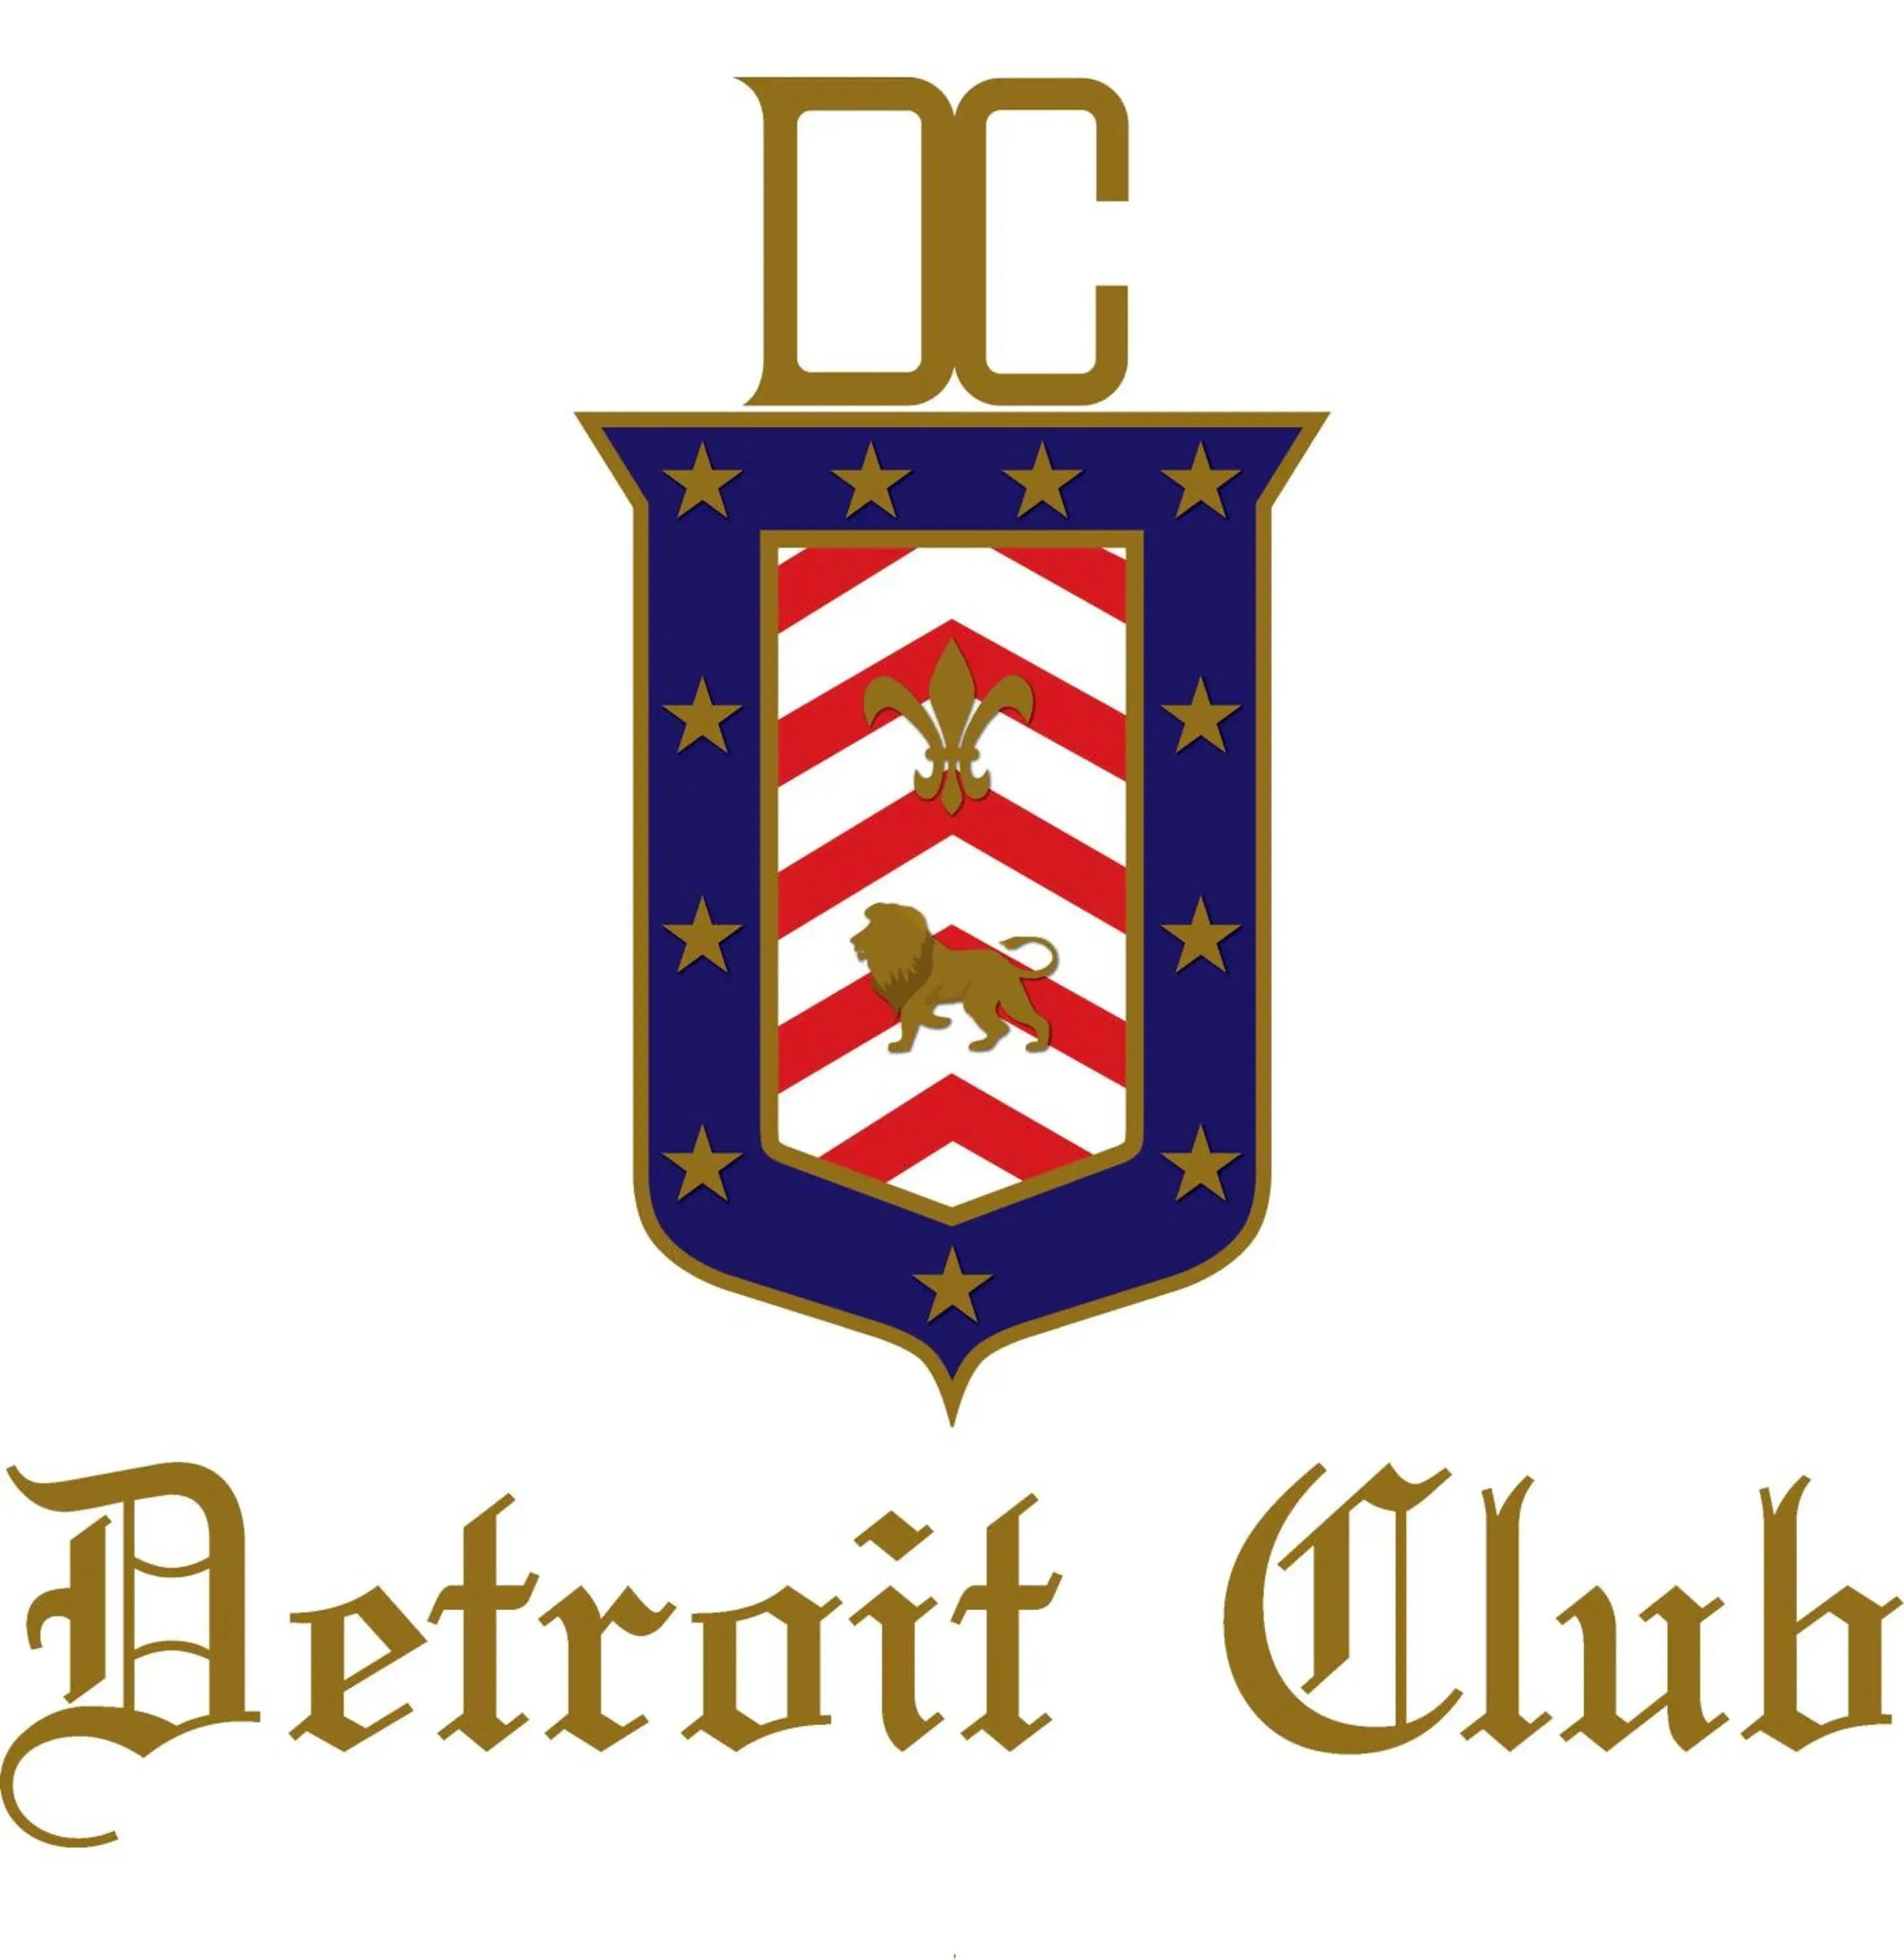 Property logo or sign, Property Logo/Sign in The Detroit Club